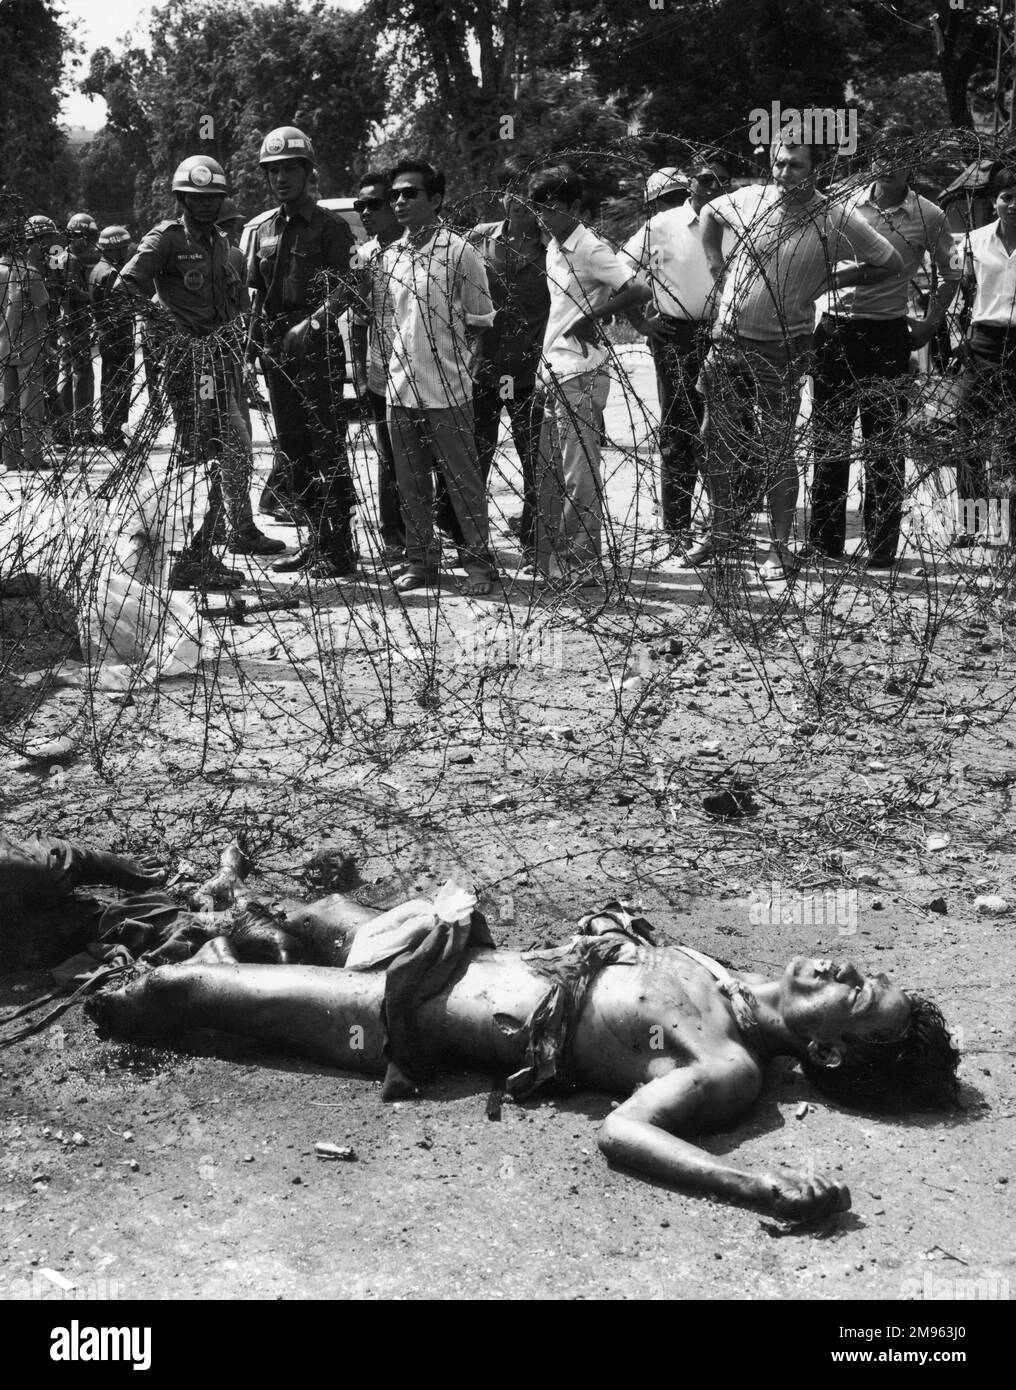 A mass of barbed wire is all that separates the mangled victim, whose leg has been torn off in a Viet Cong attack, & a crowd of onlookers Stock Photo